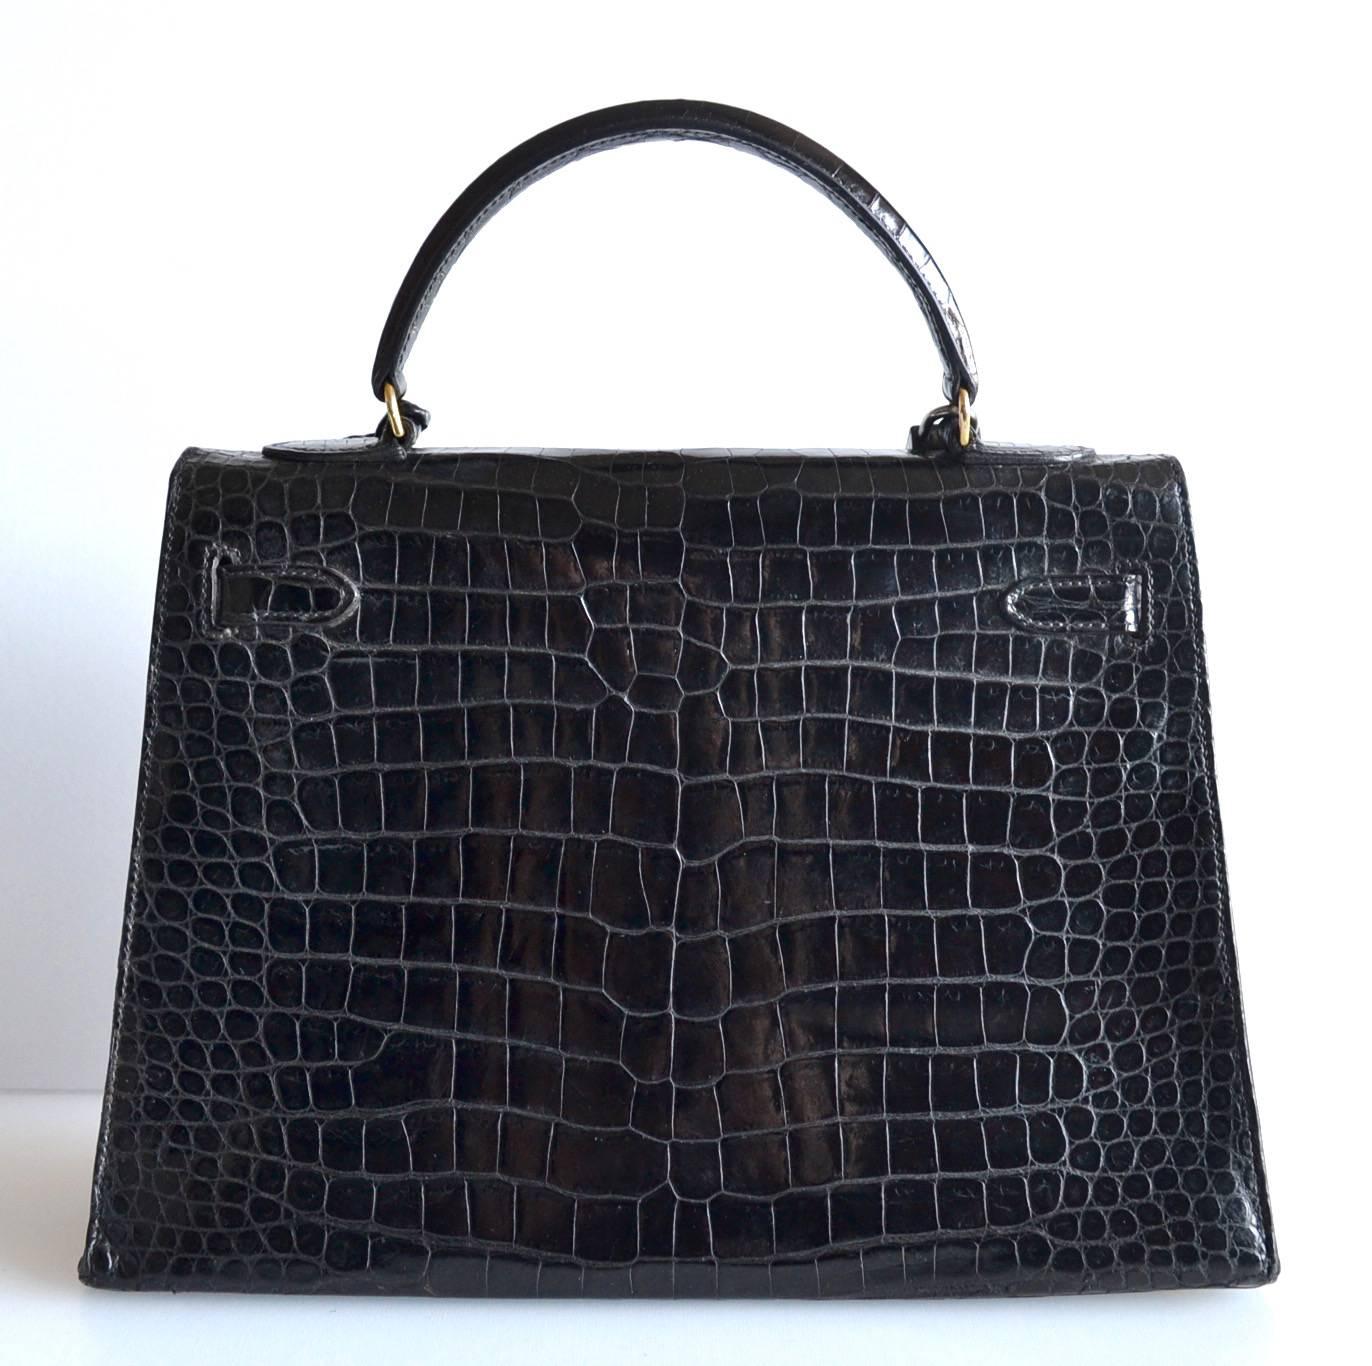 Hermes Kelly 32 Black Crocodile
 
Black shiny crocodile skin with gold hardware
Sellier model
 
The bag is lined with chevre leather. Interior is in good condition with a zipper pocket.
This bag is in good condition. It is a vintage bag. Normal use